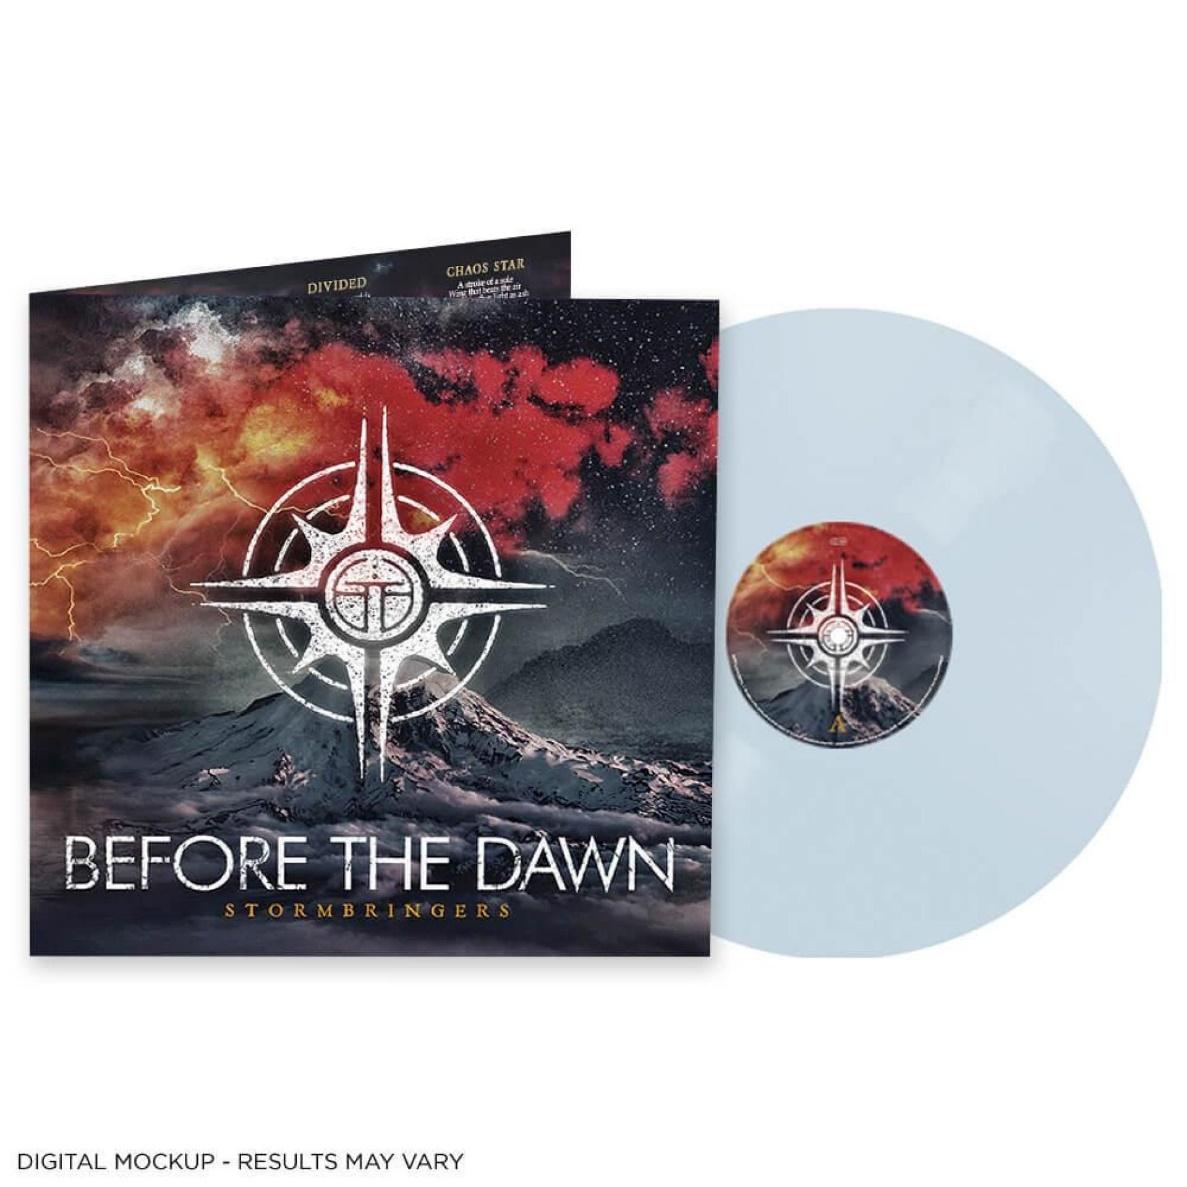 Before the dawn vinyle